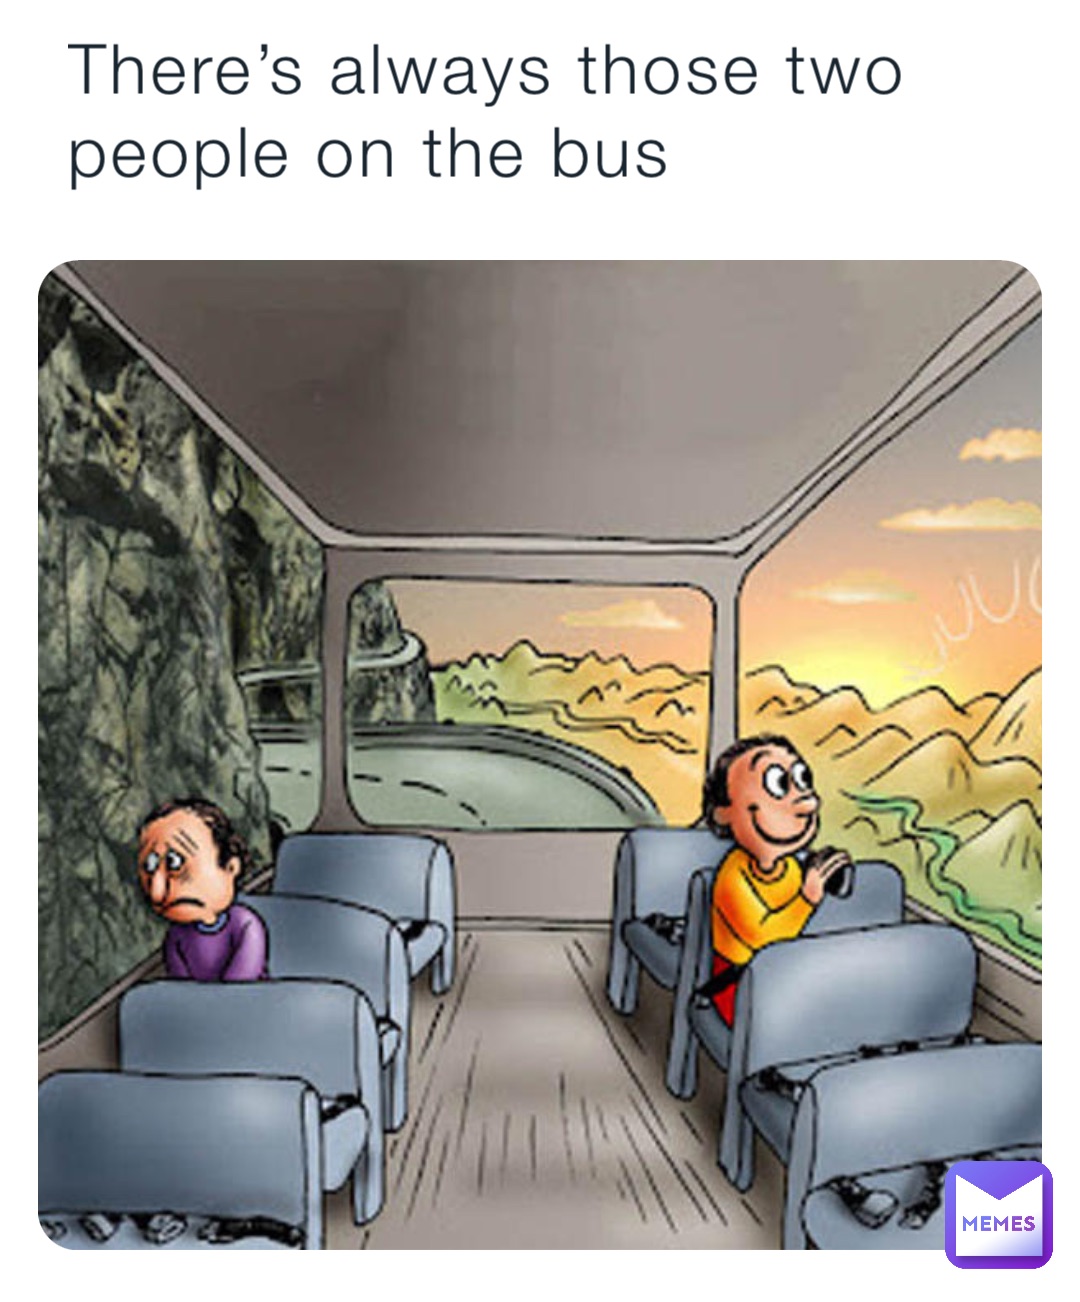 There’s always those two people on the bus